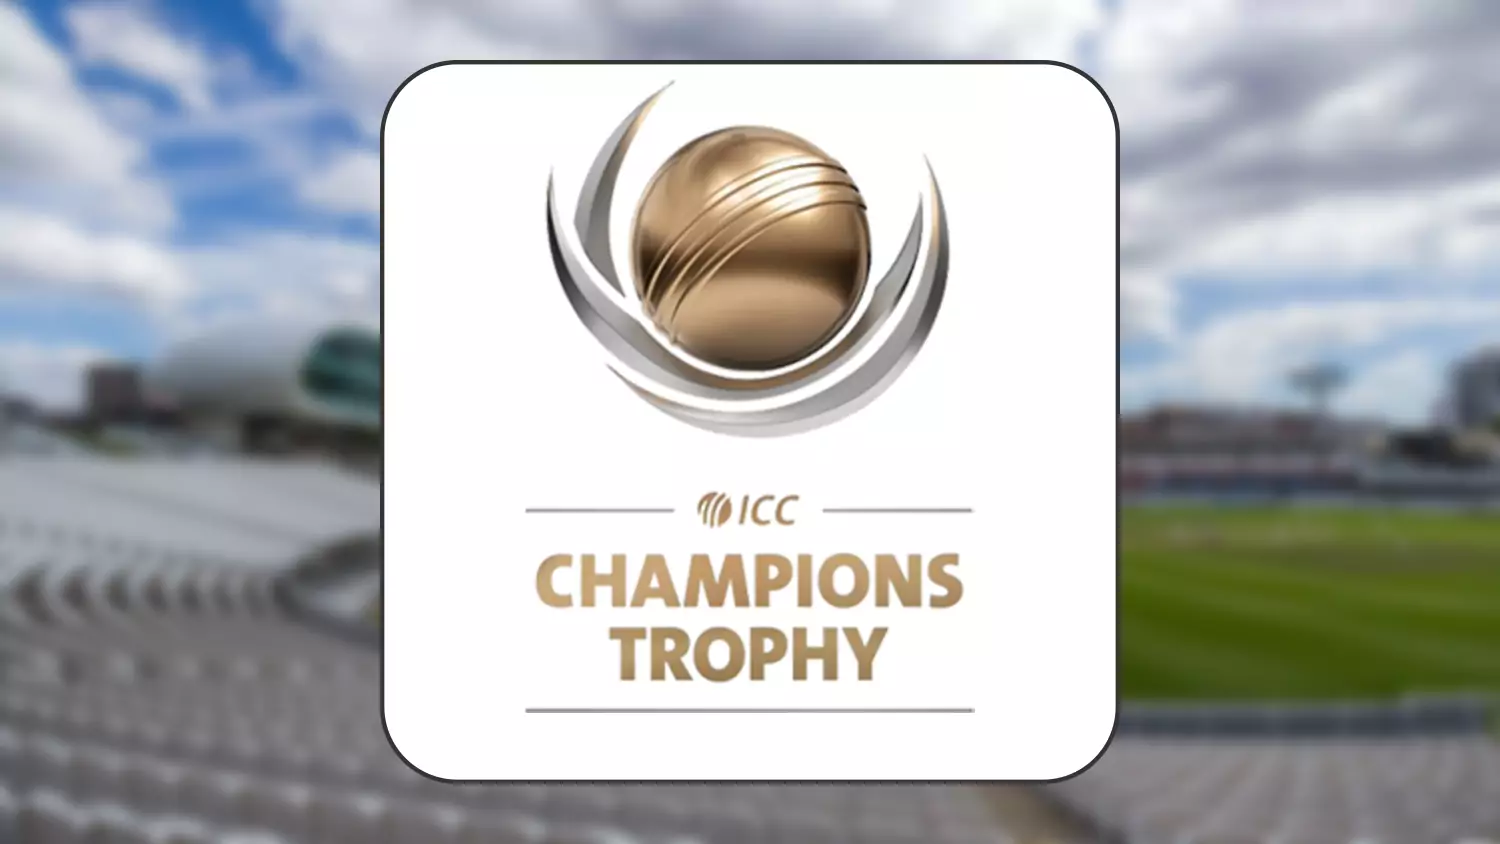 ICC Champions Trophy is one of the oldest cricket tournaments.